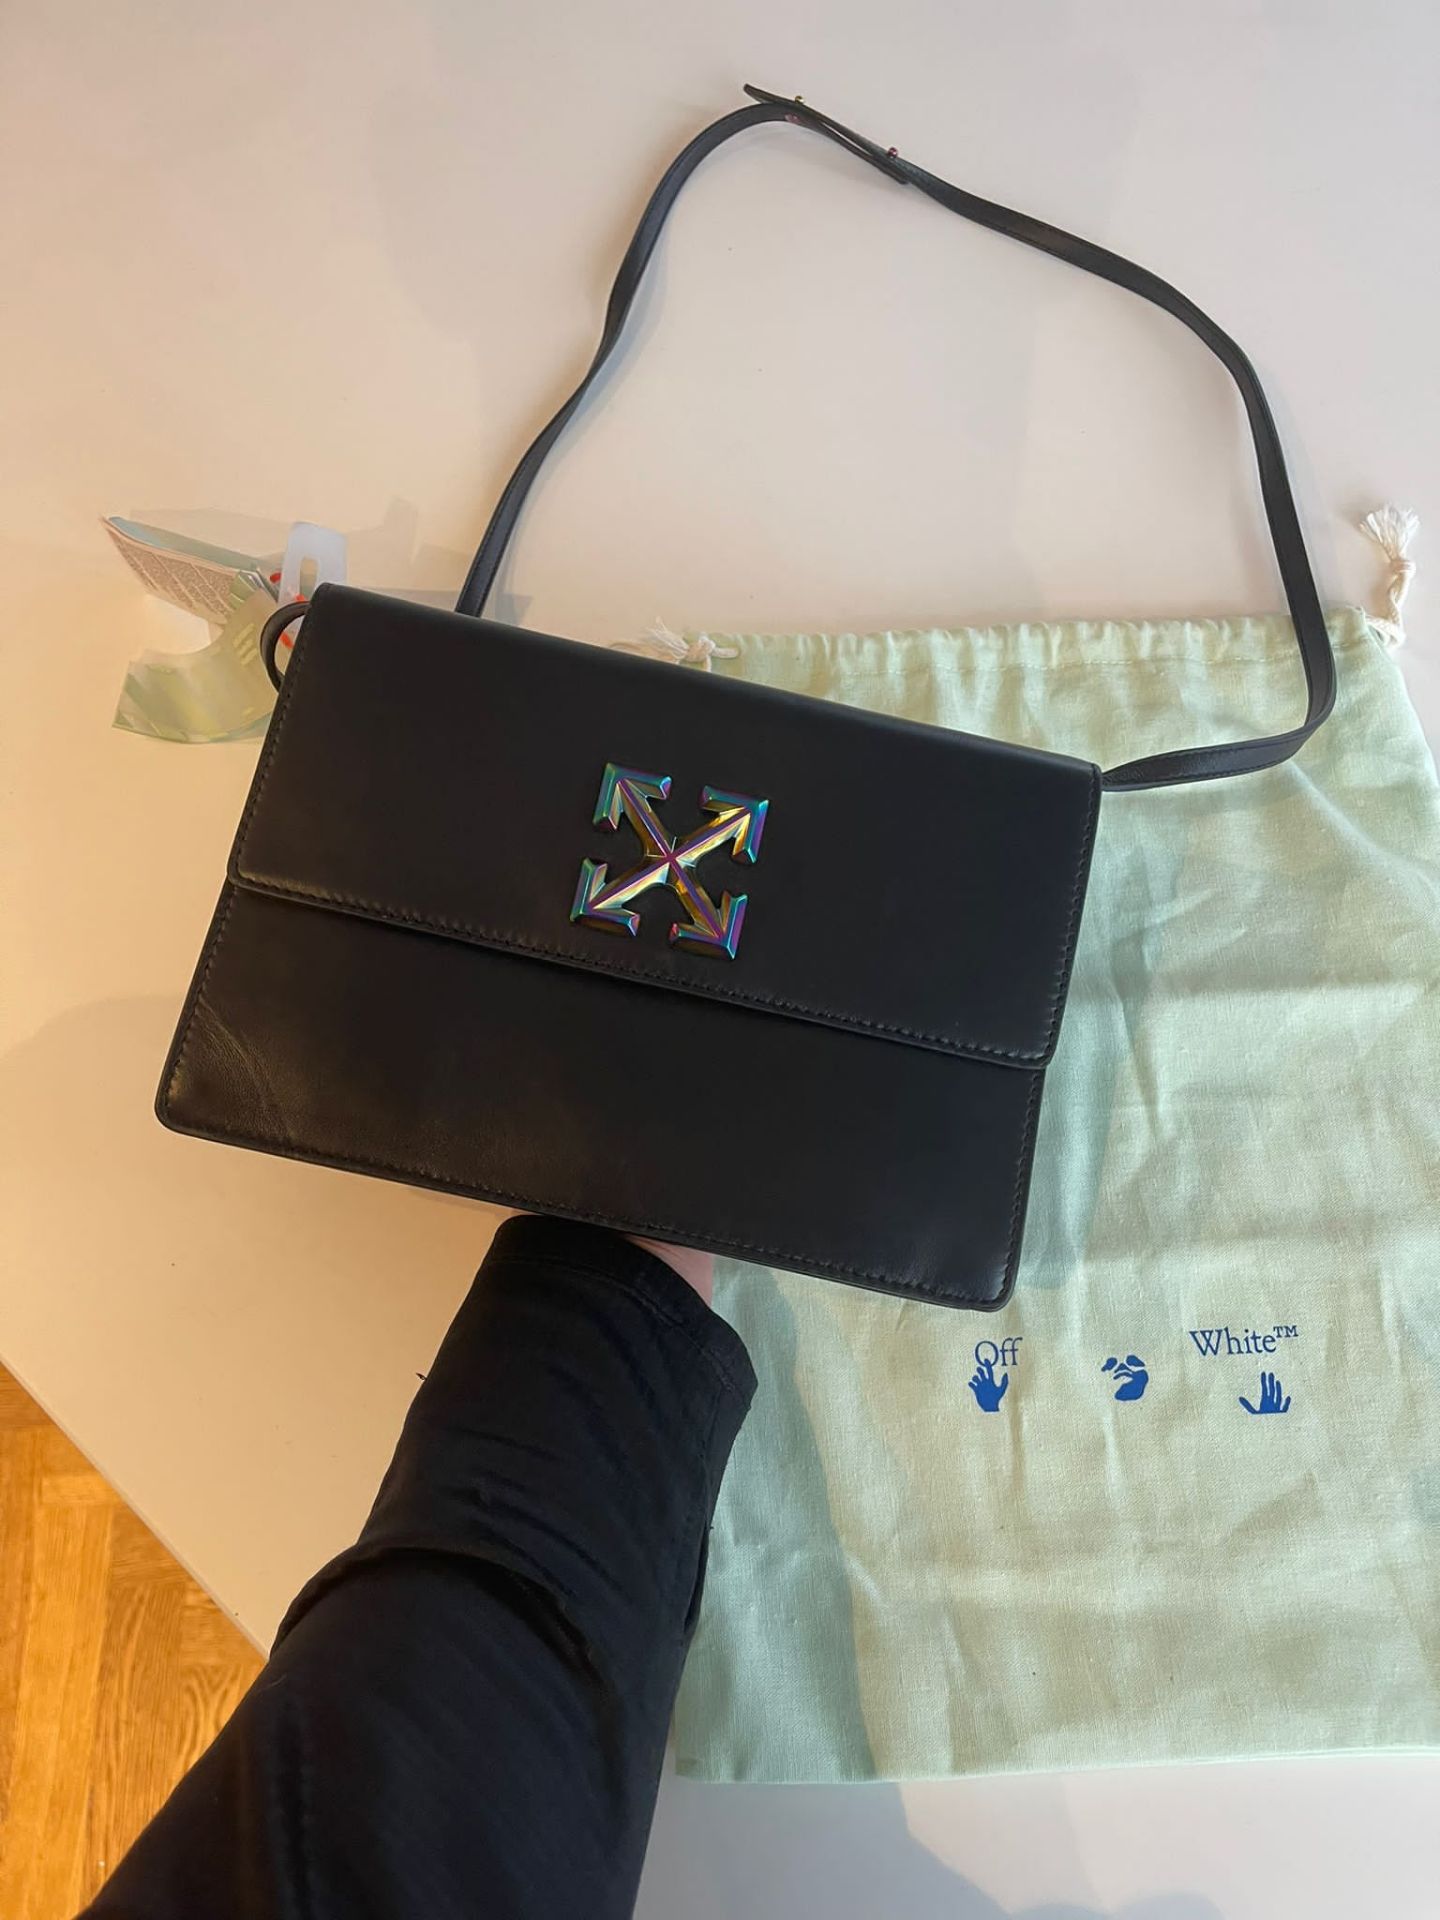 Off-White c/o Virgil Abloh Jitney 1.0 Black Clutch Bag. RRP £1,150. Off-White leather bag with - Image 2 of 2